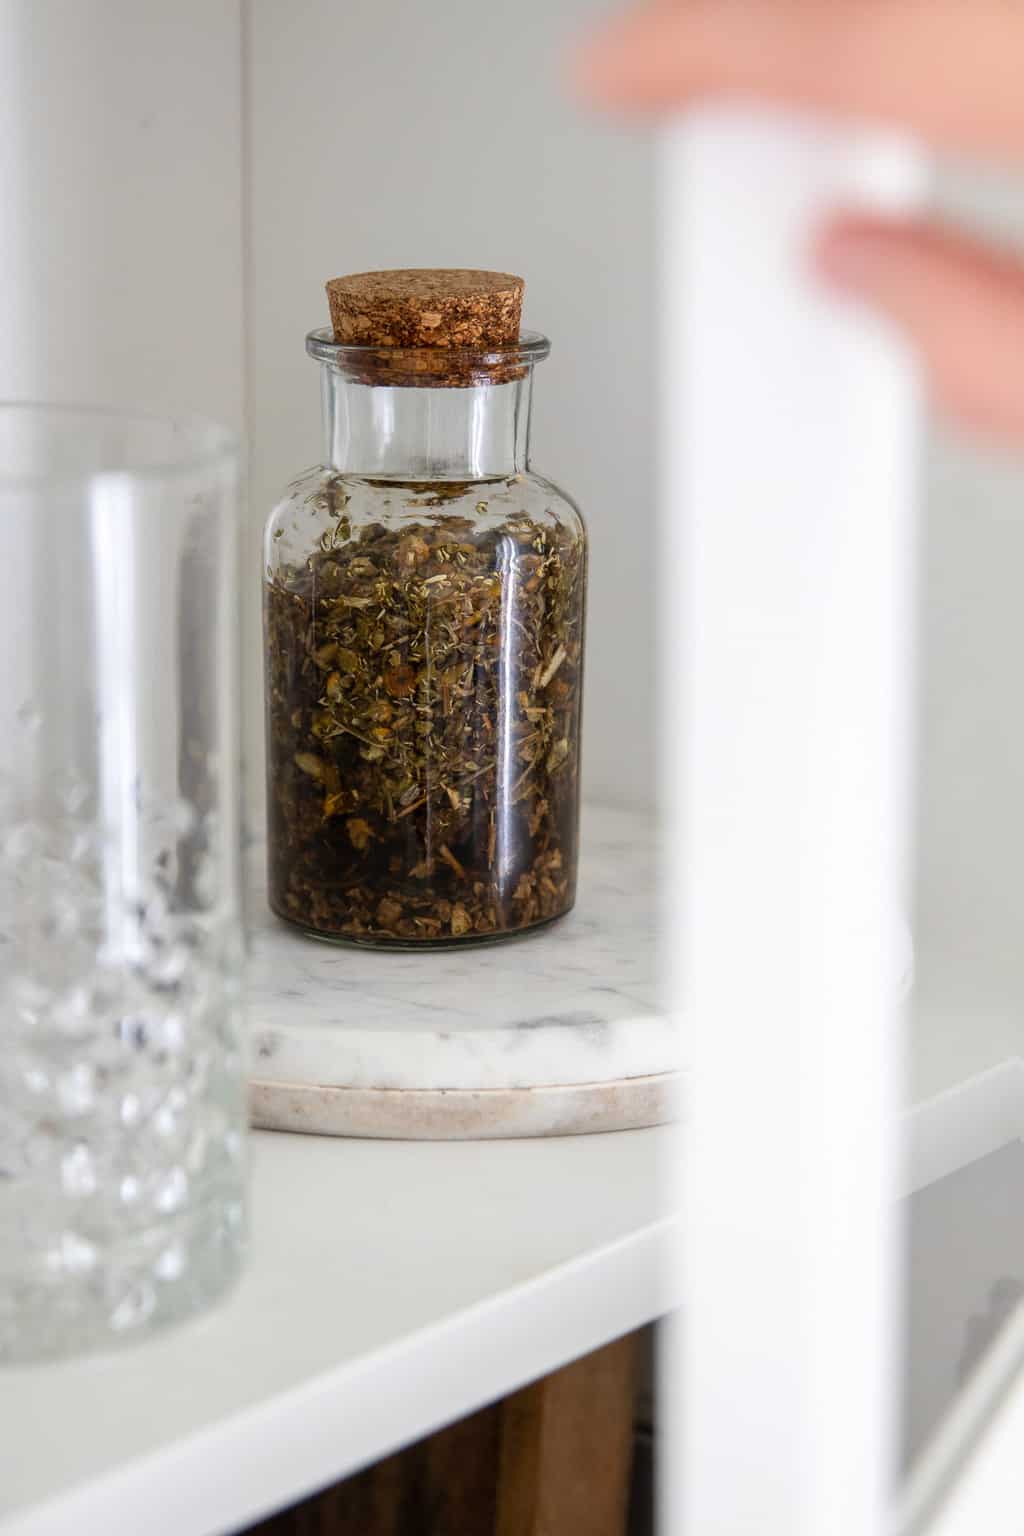 Let herbs infuse for 4-6 weeks